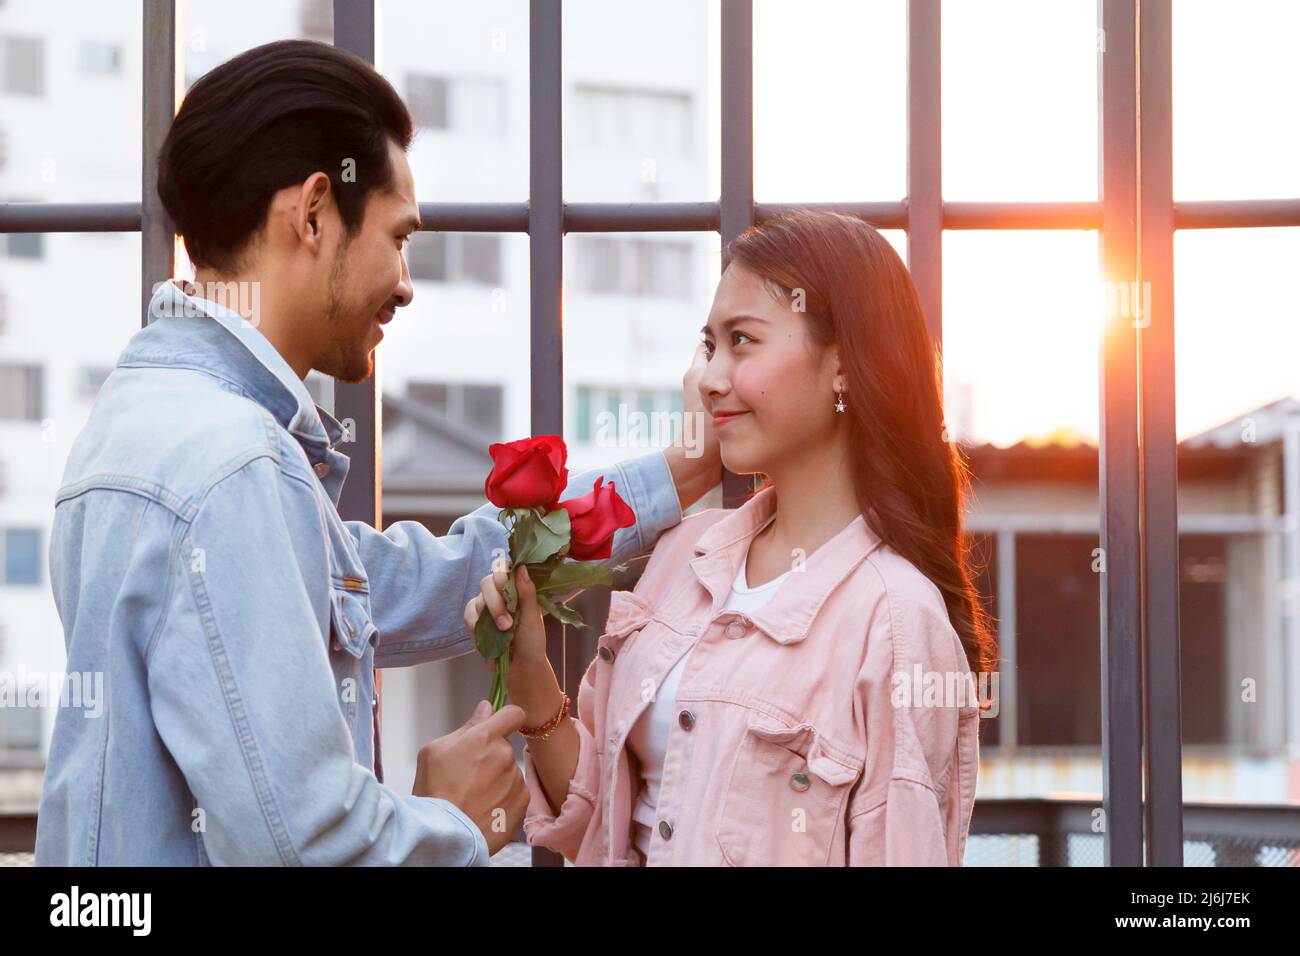 young happy couple love and romantic at first date relationship. asian teenage woman surprise and smiling at boyfriend gives red rose flowers at dinne Stock Photo